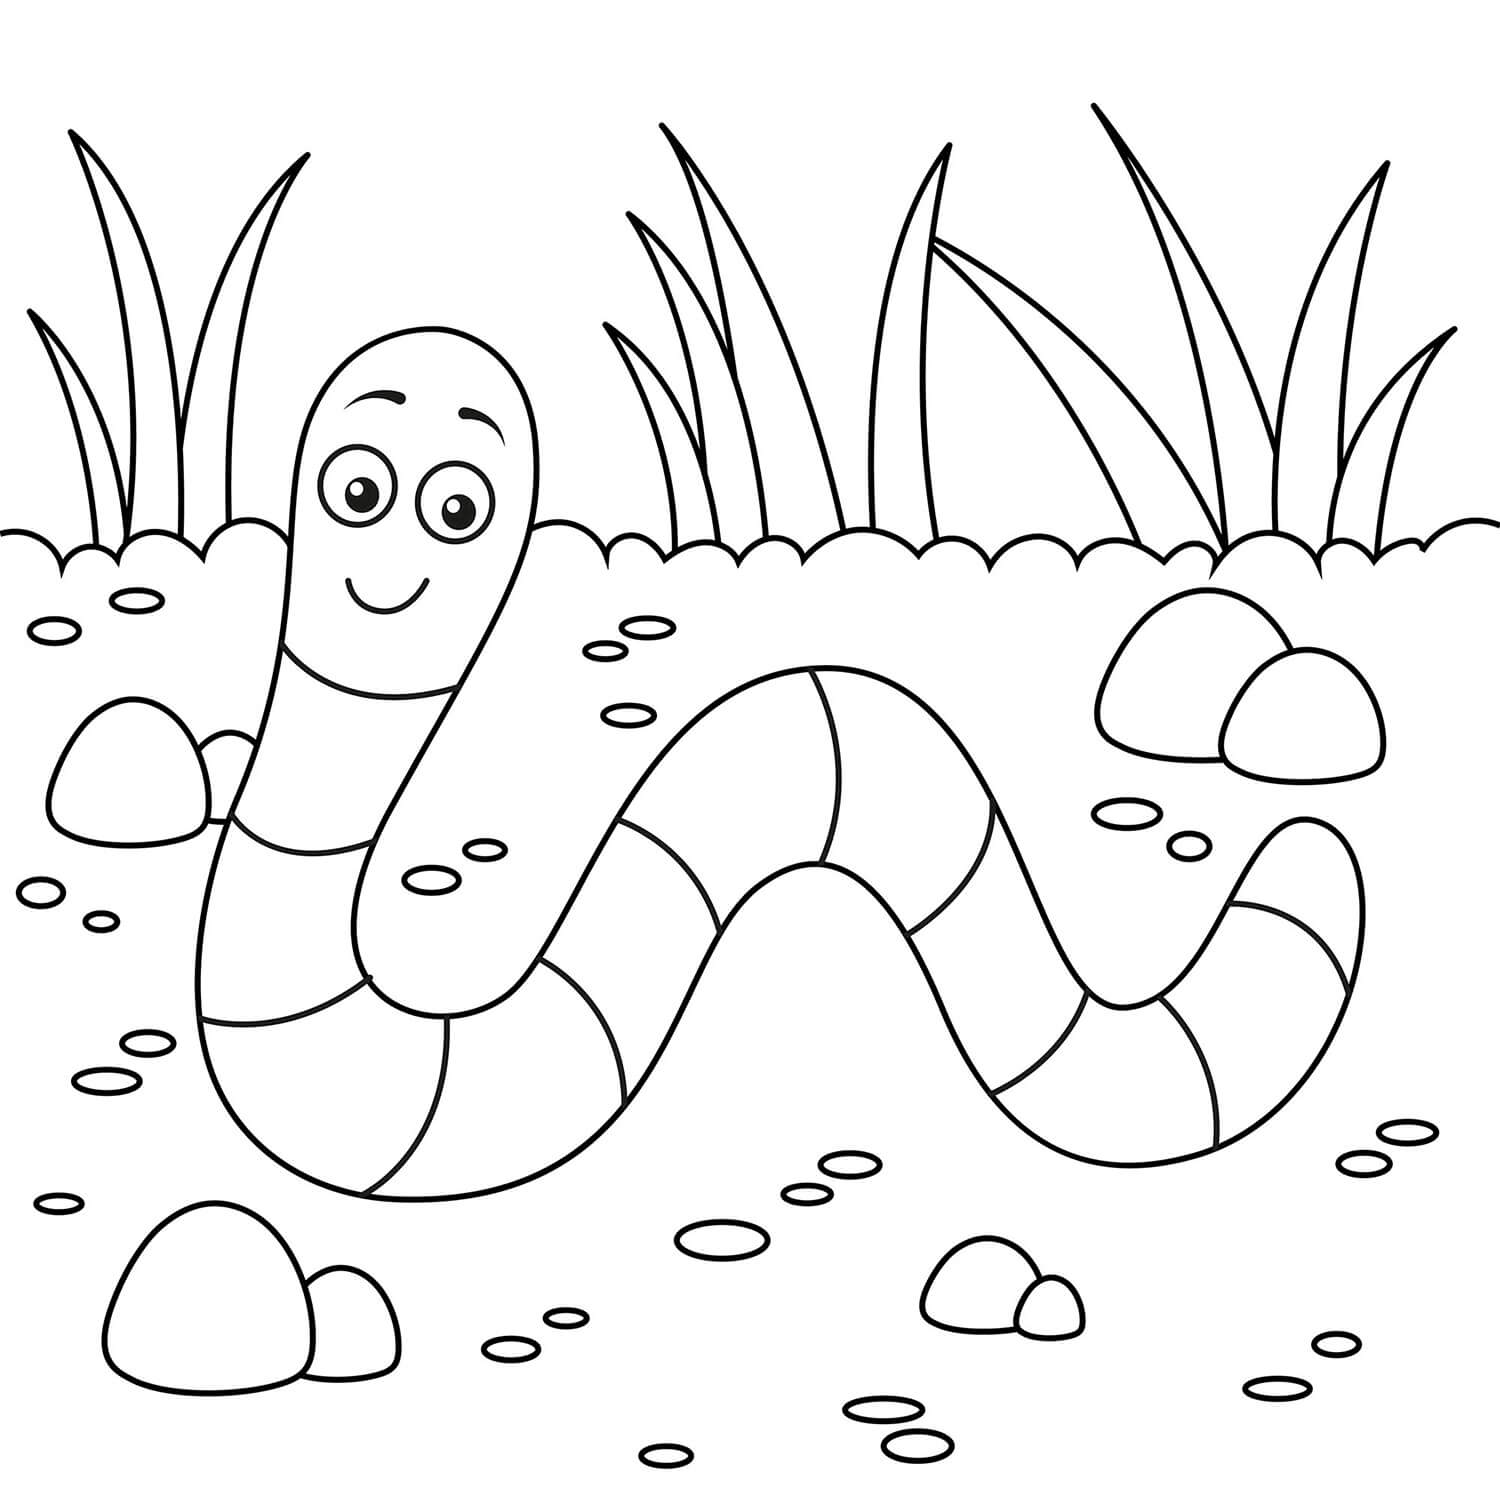 Smiling Worm coloring page - Download, Print or Color Online for Free